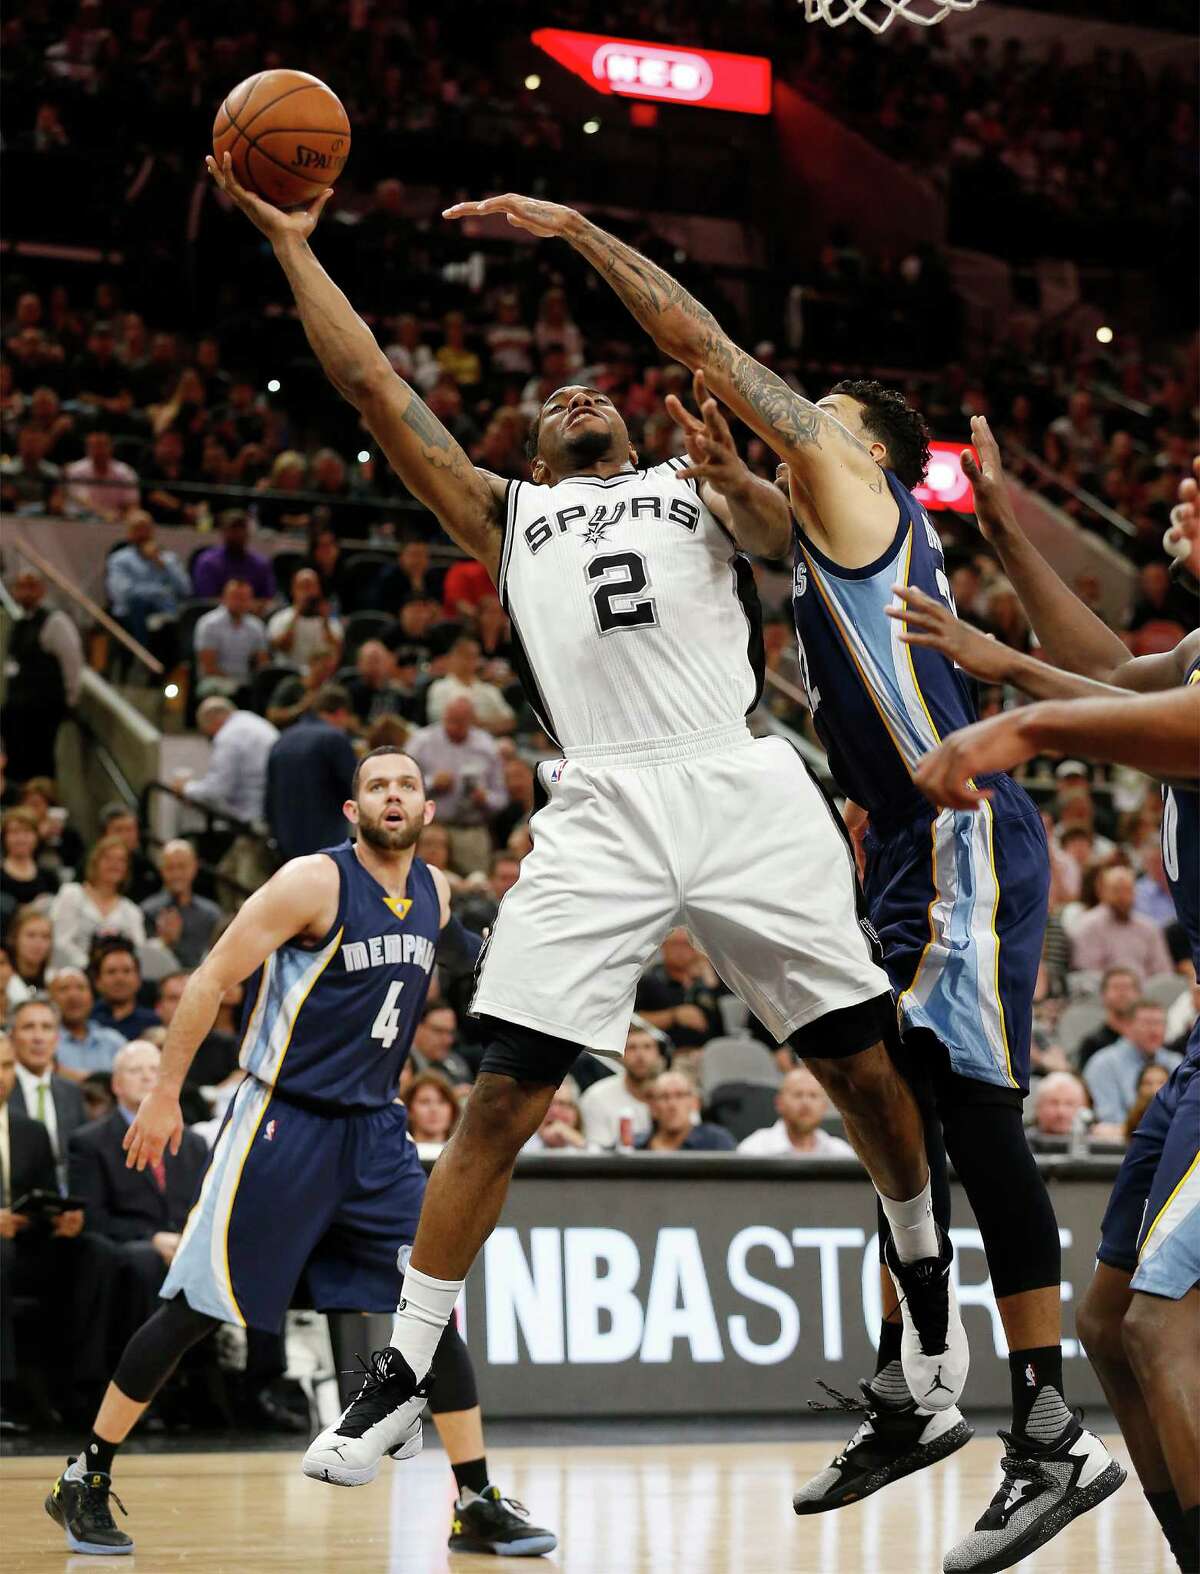 Spurs's Kawhi Leonard (02) goes for a shot against Memphis Grizzlies' Matt Barnes (22) at the AT&T Center in Game 2 of the first round of Western Conference playoffs on Tuesday, Apr. 19, 2016. (Kin Man Hui/San Antonio Express-News)